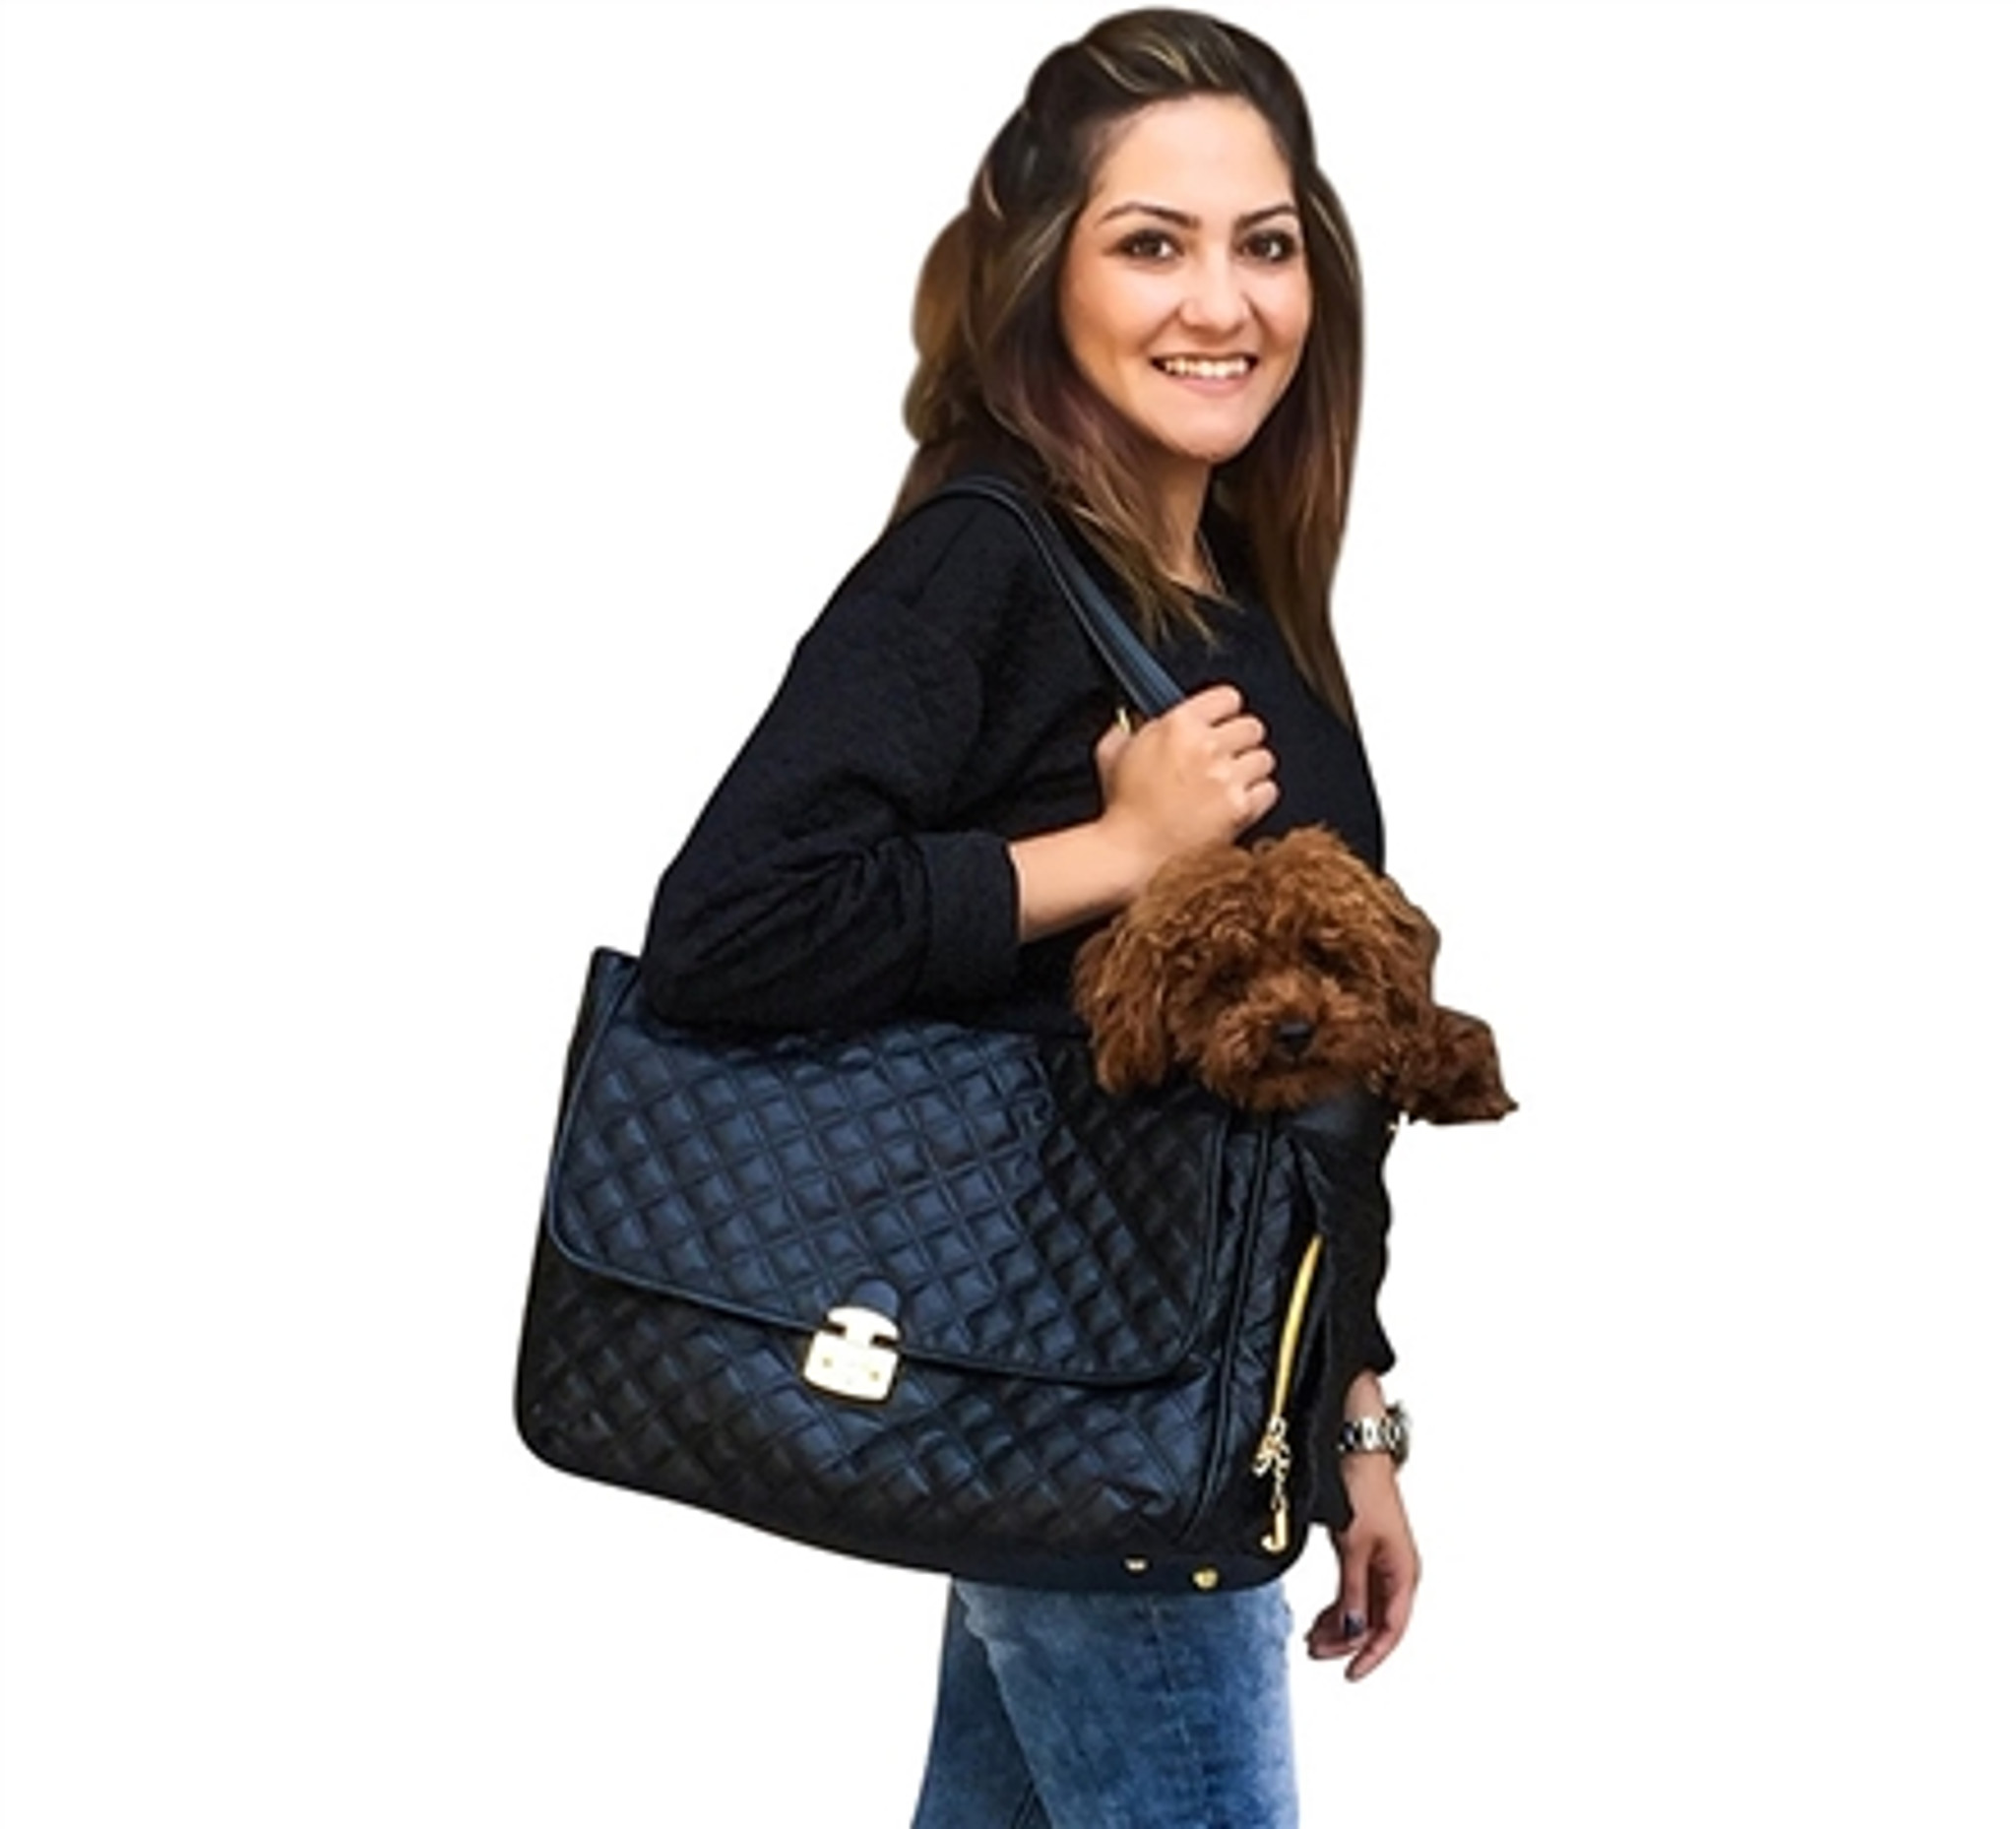 The Dog Squad Kate Quilted Carrier, Black